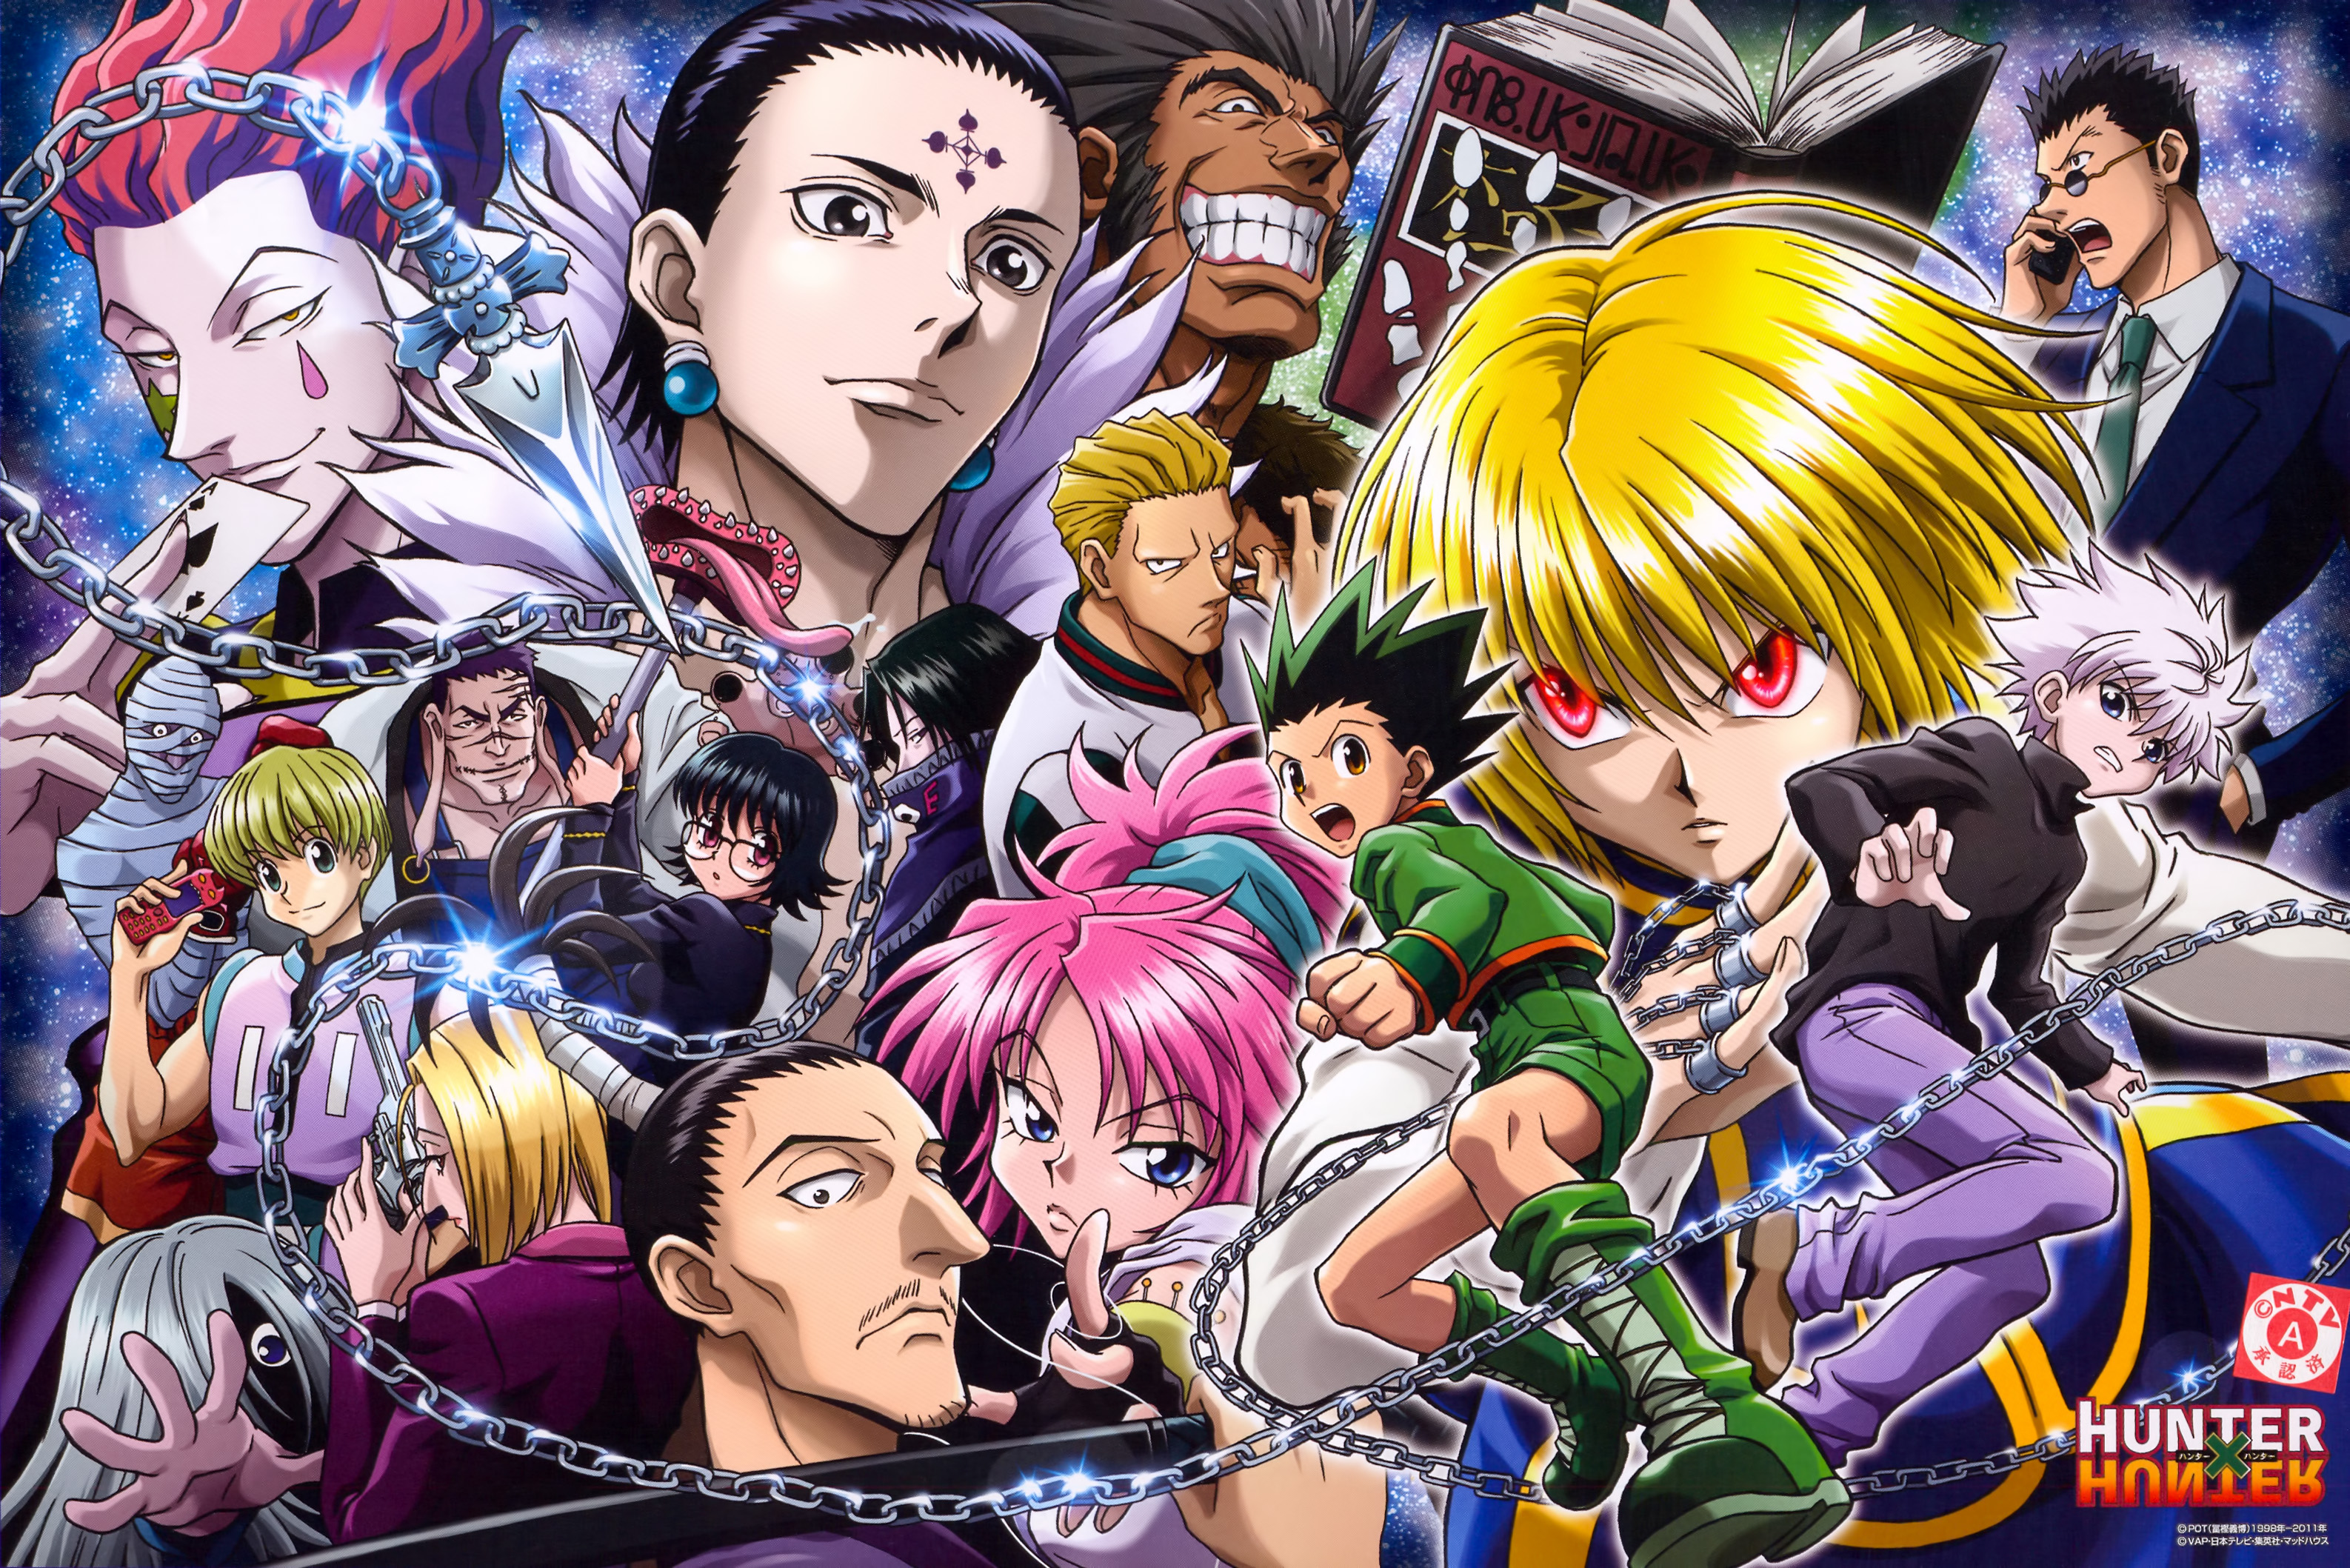 Hunter x Hunter: The age of the main characters